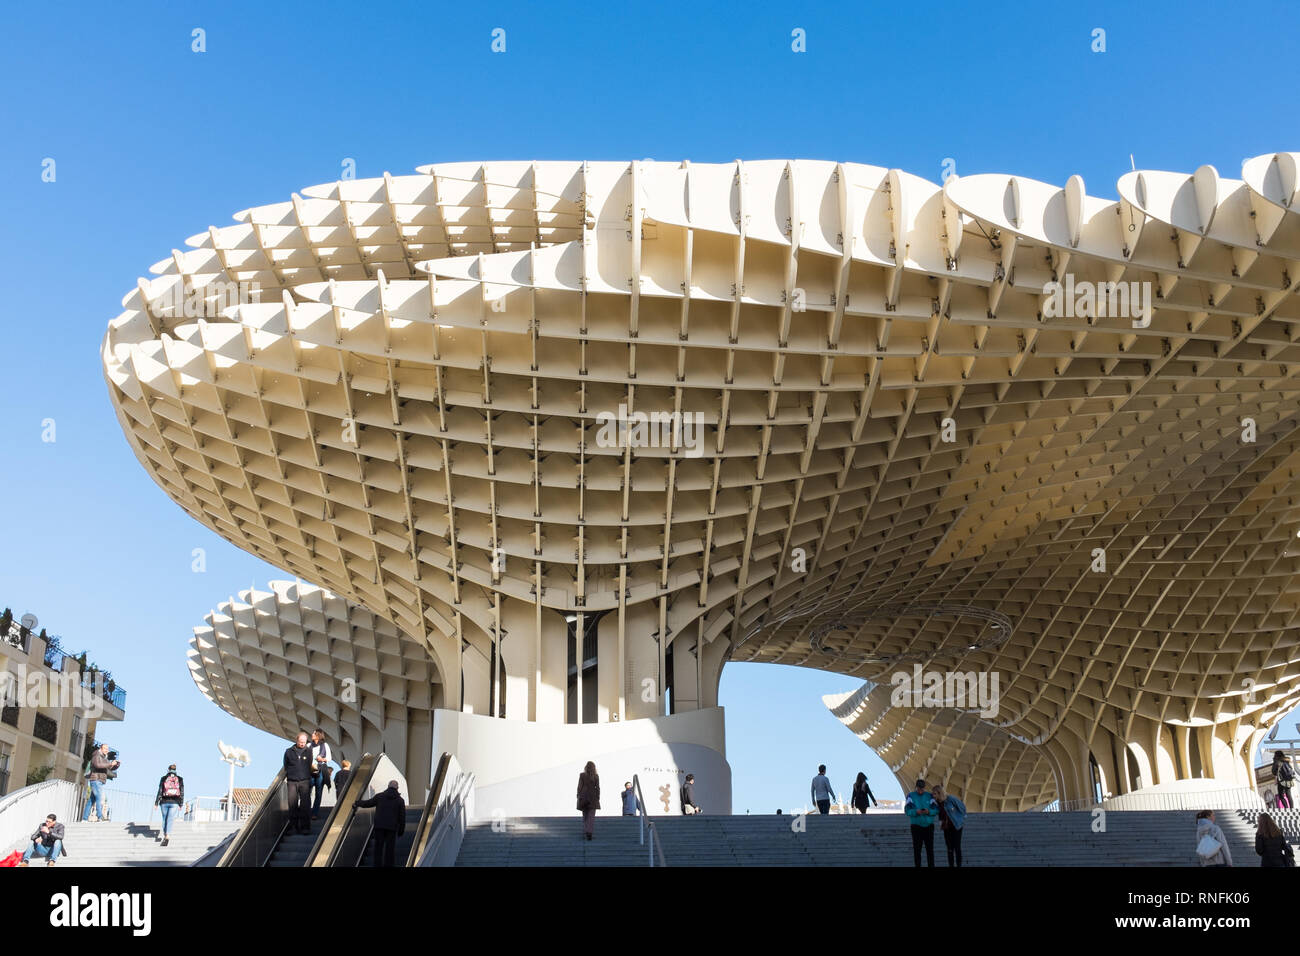 Escalator leading up to Metropol Parasol, one of the largest wooden structures ever built in the spanish city of Seville, Andalucia Stock Photo